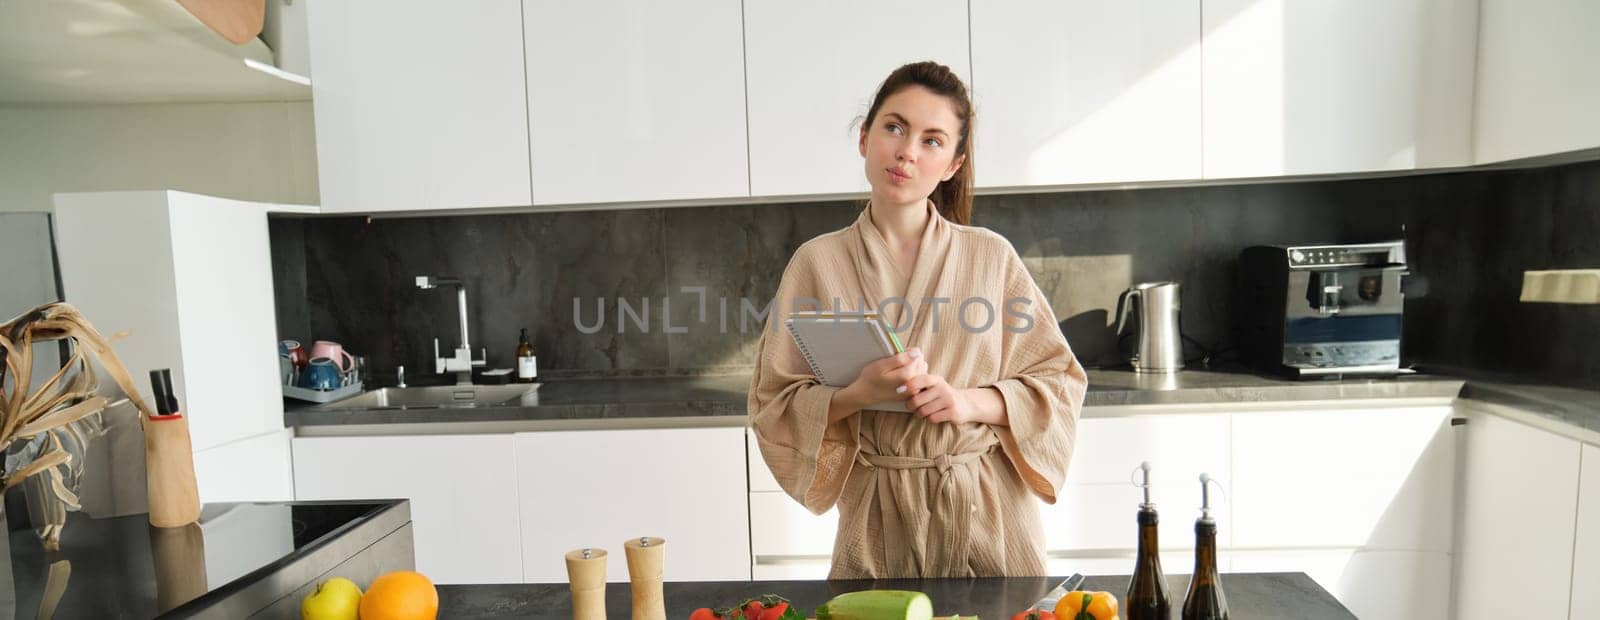 Portrait of creative young woman, cooking, holding recipe book, thinking while making meal, preparing food in the kitchen, standing in bathrobe.